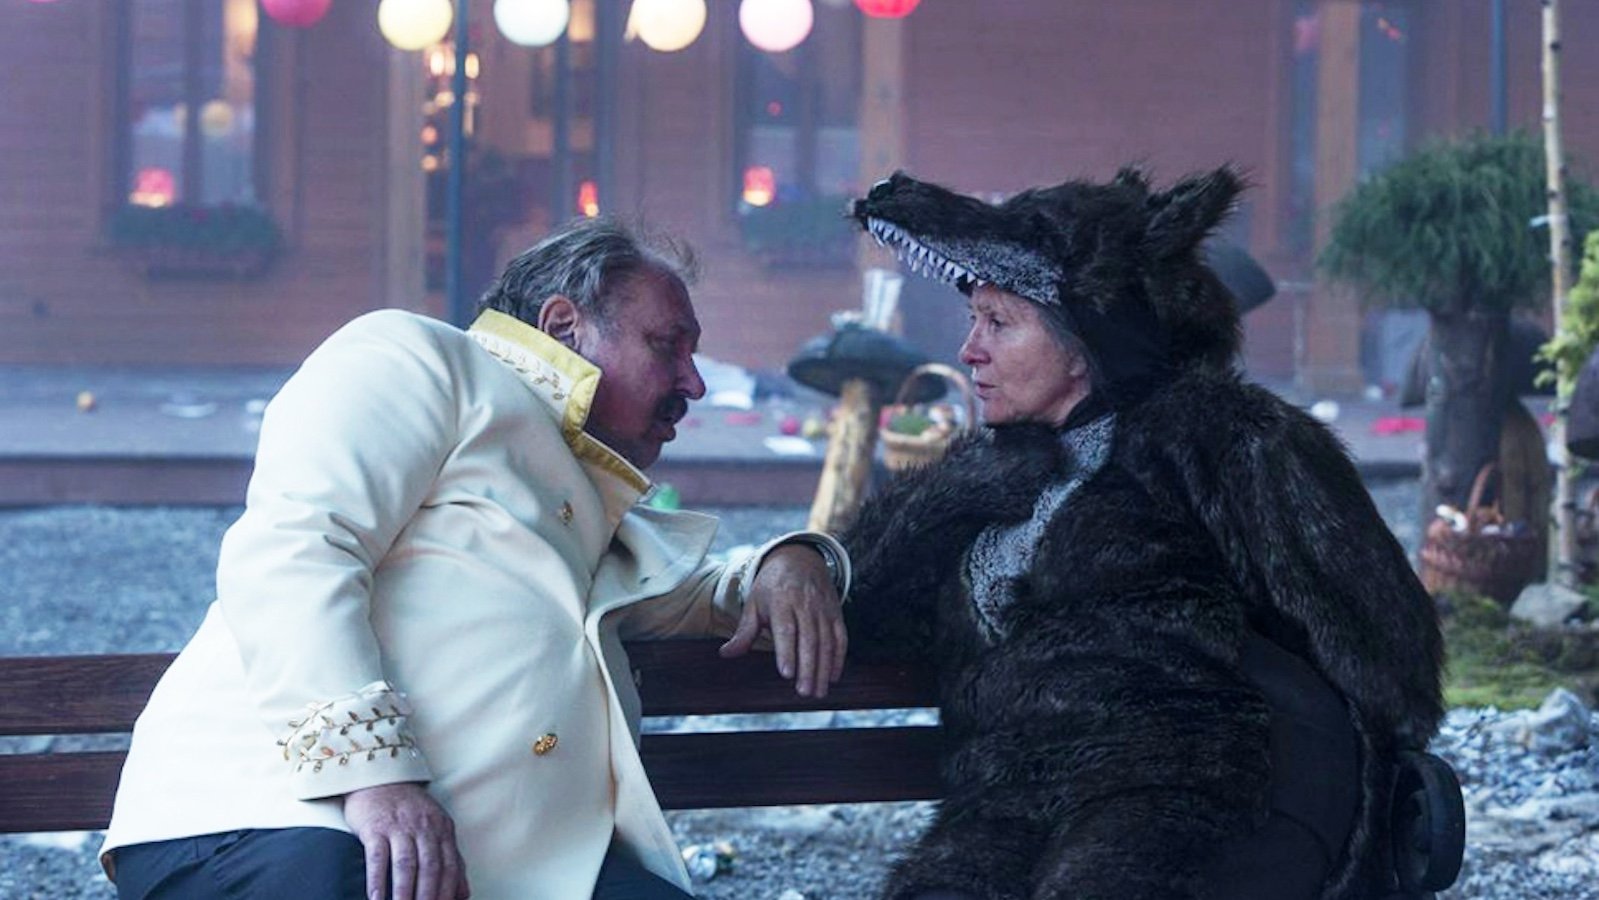 Two people sit on a bench looking at one another: the man is in a white jacket, the woman is wearing a wolf costume